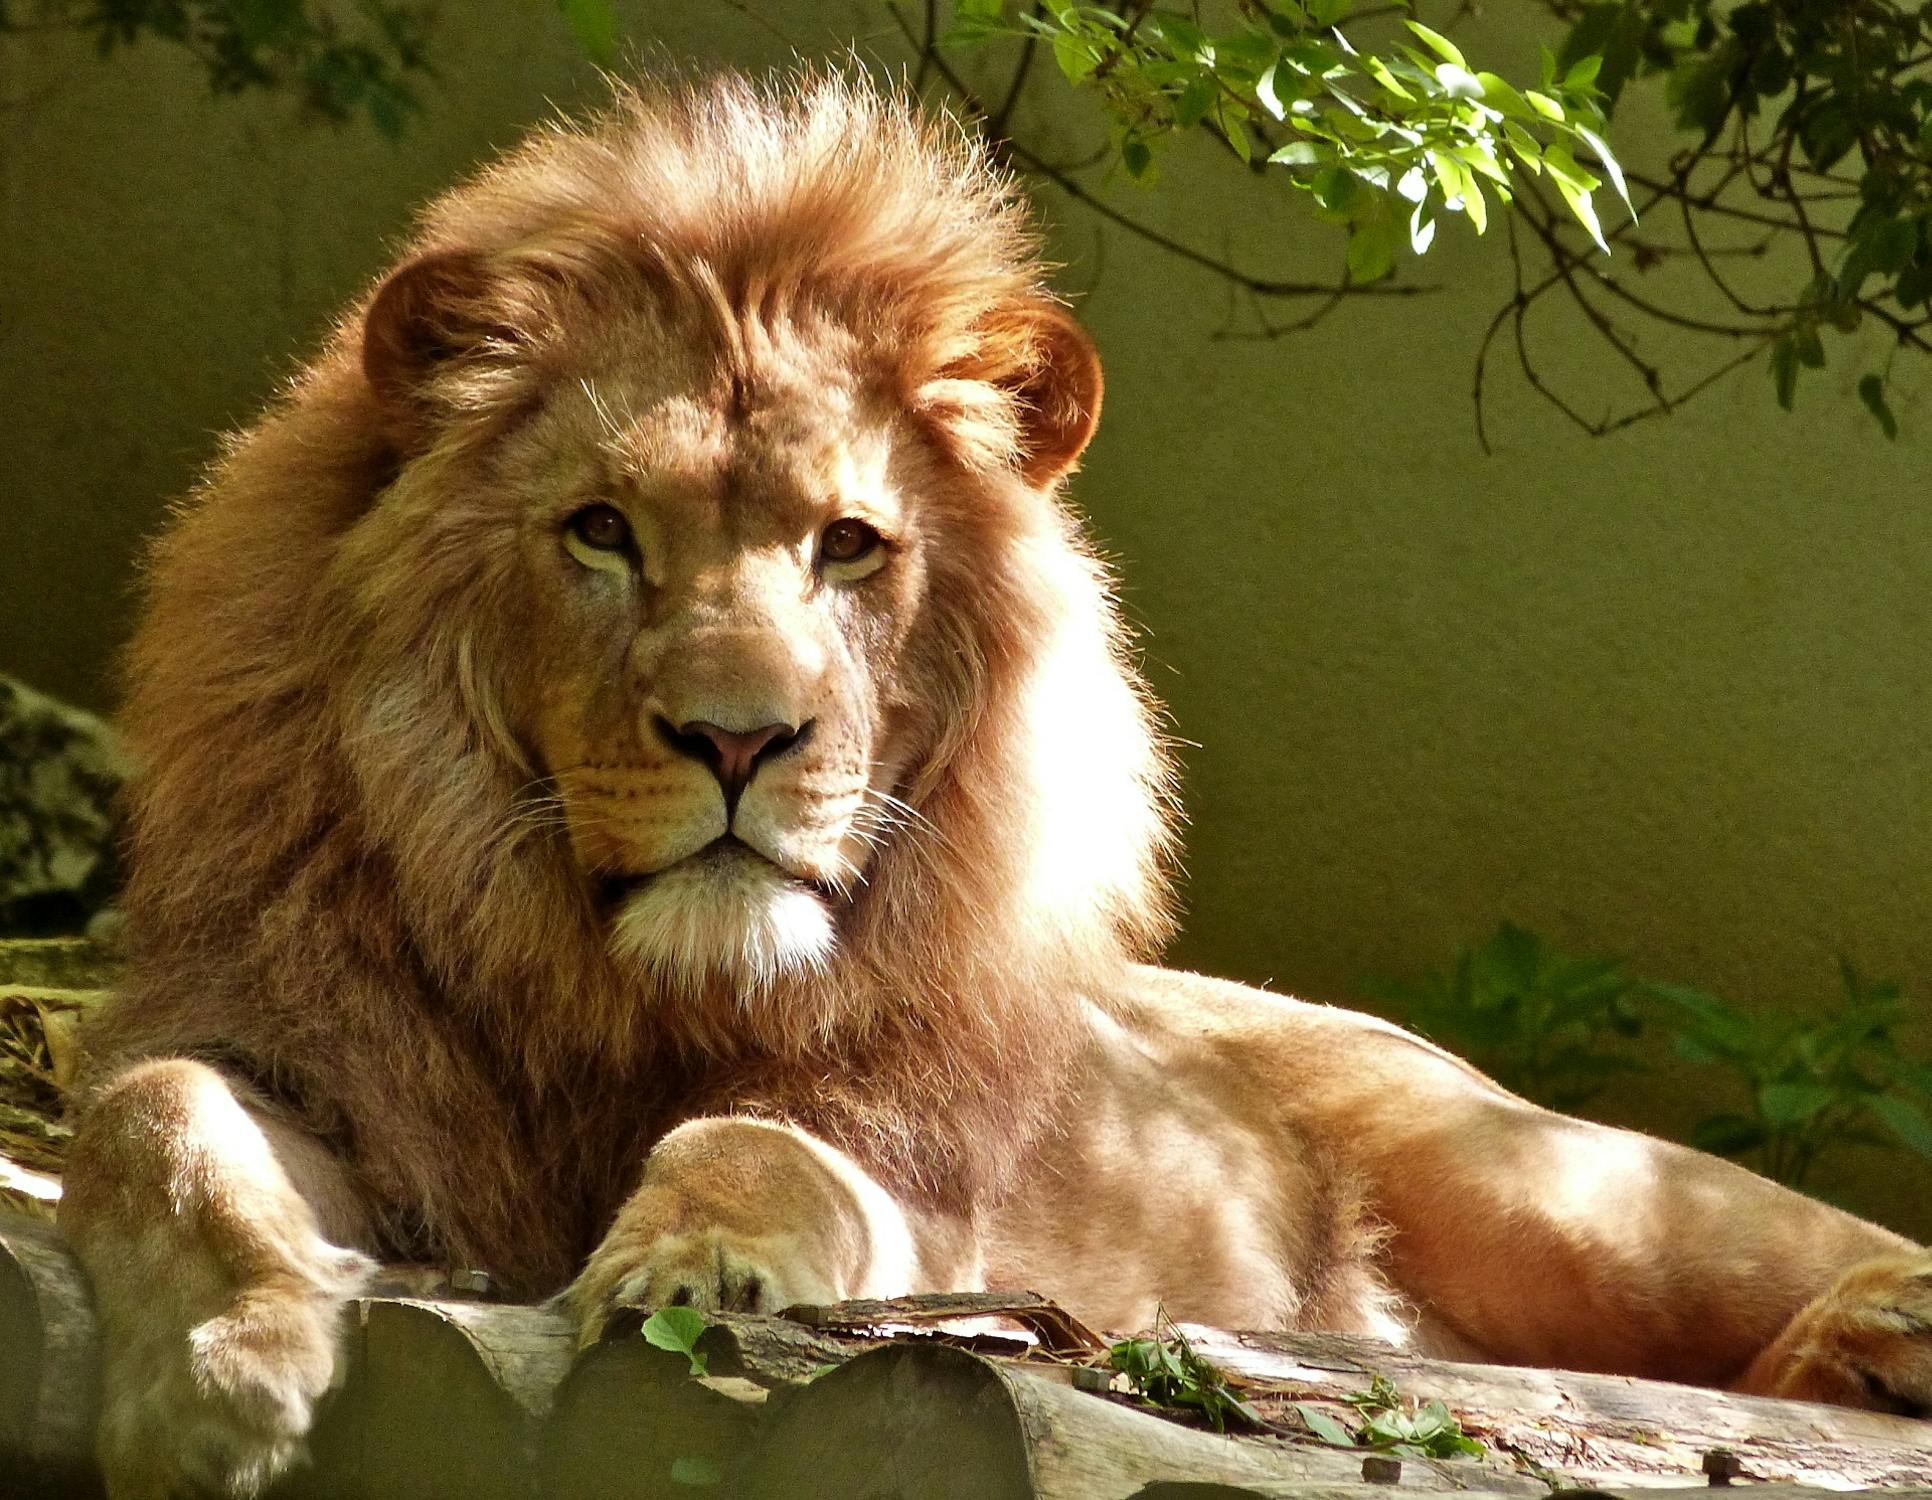 Lion Photo by Pixabay from Pexels